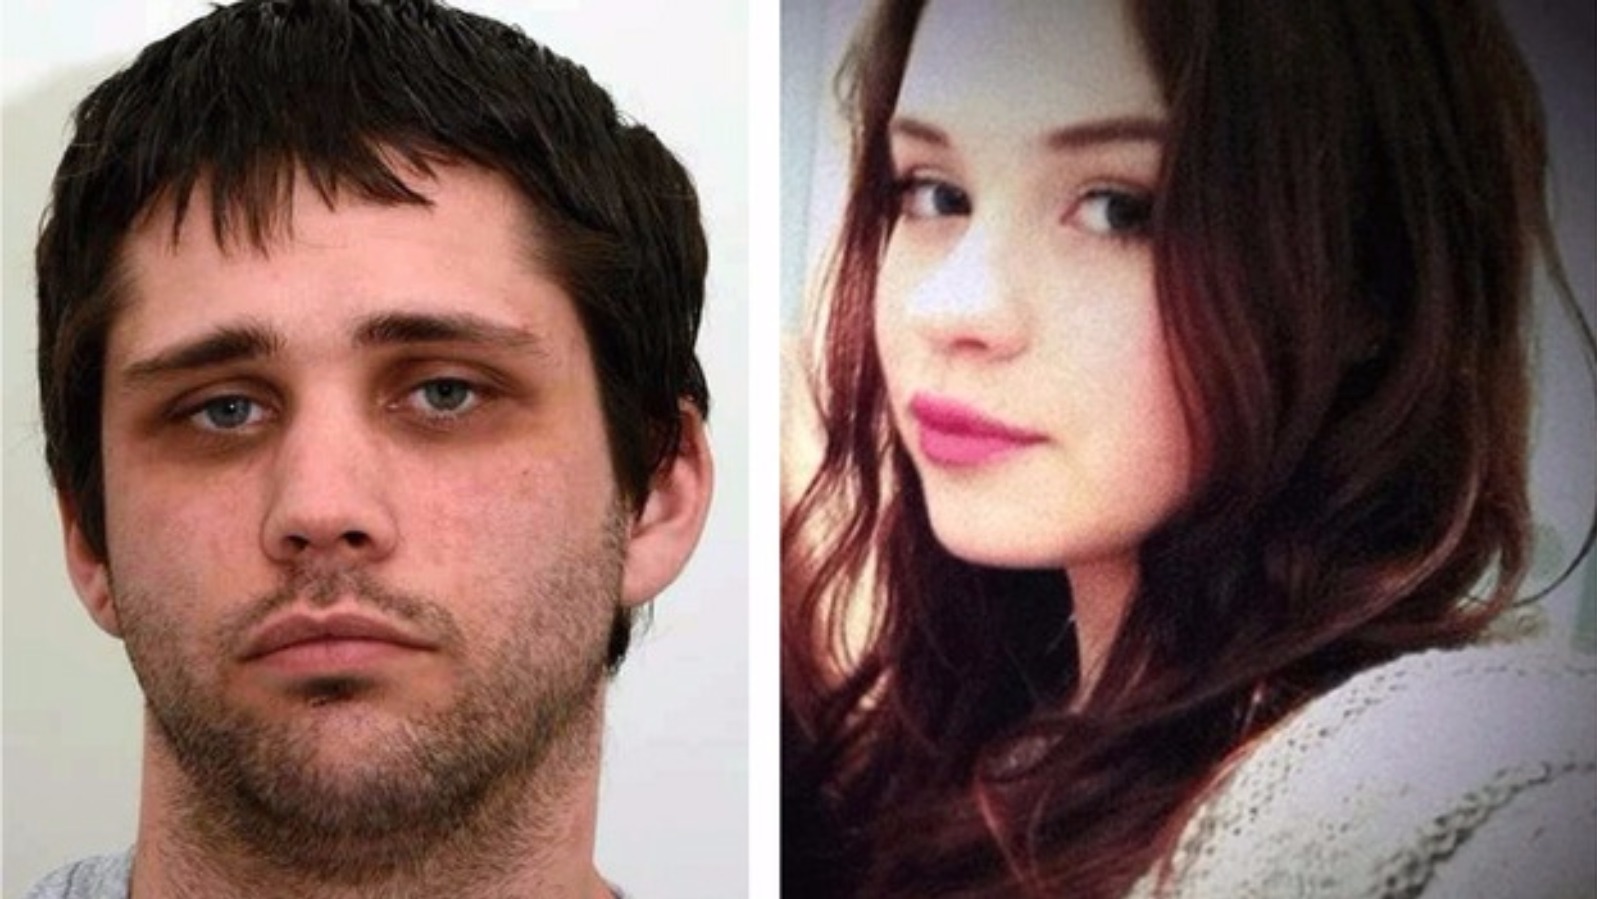 Becky Watts Judge Cries As He Jails Nathan Matthews For 33 Years For 